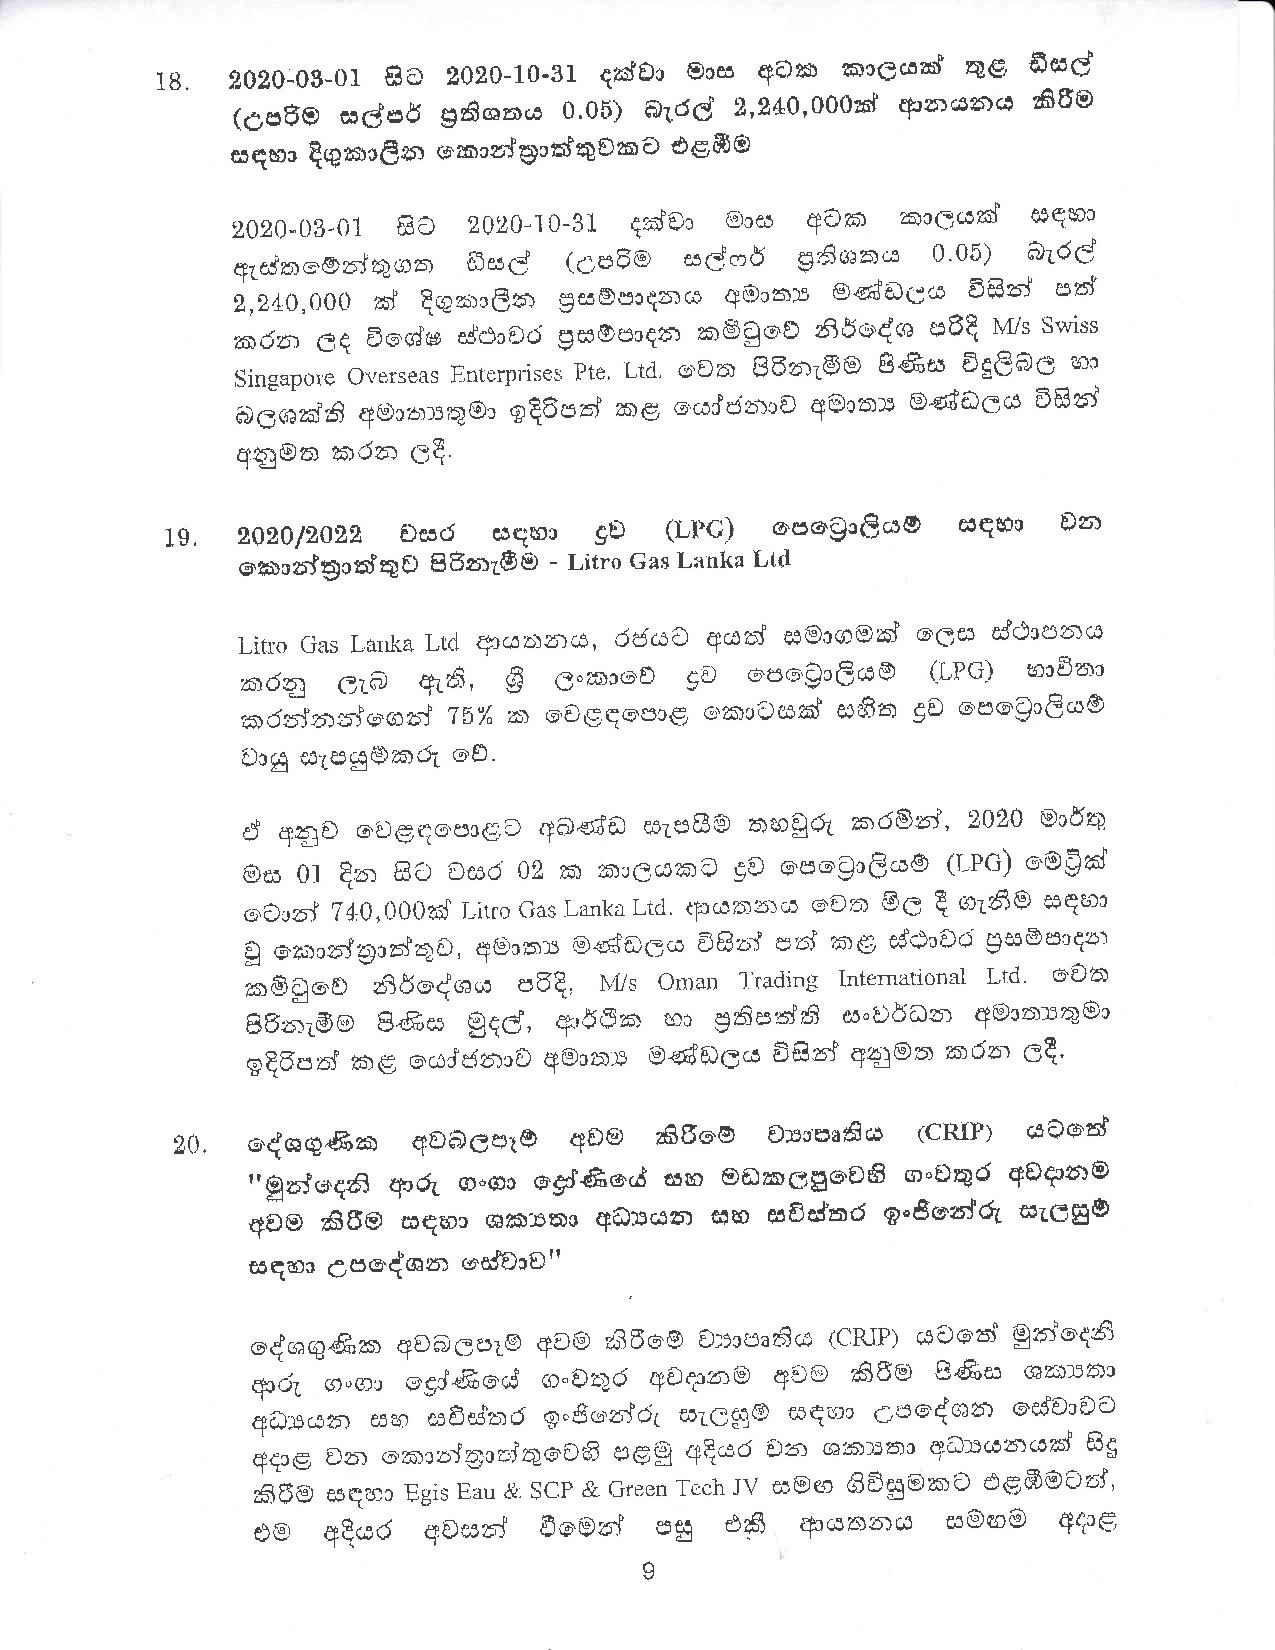 Cabinet Decision on 05.02.2020 page 009